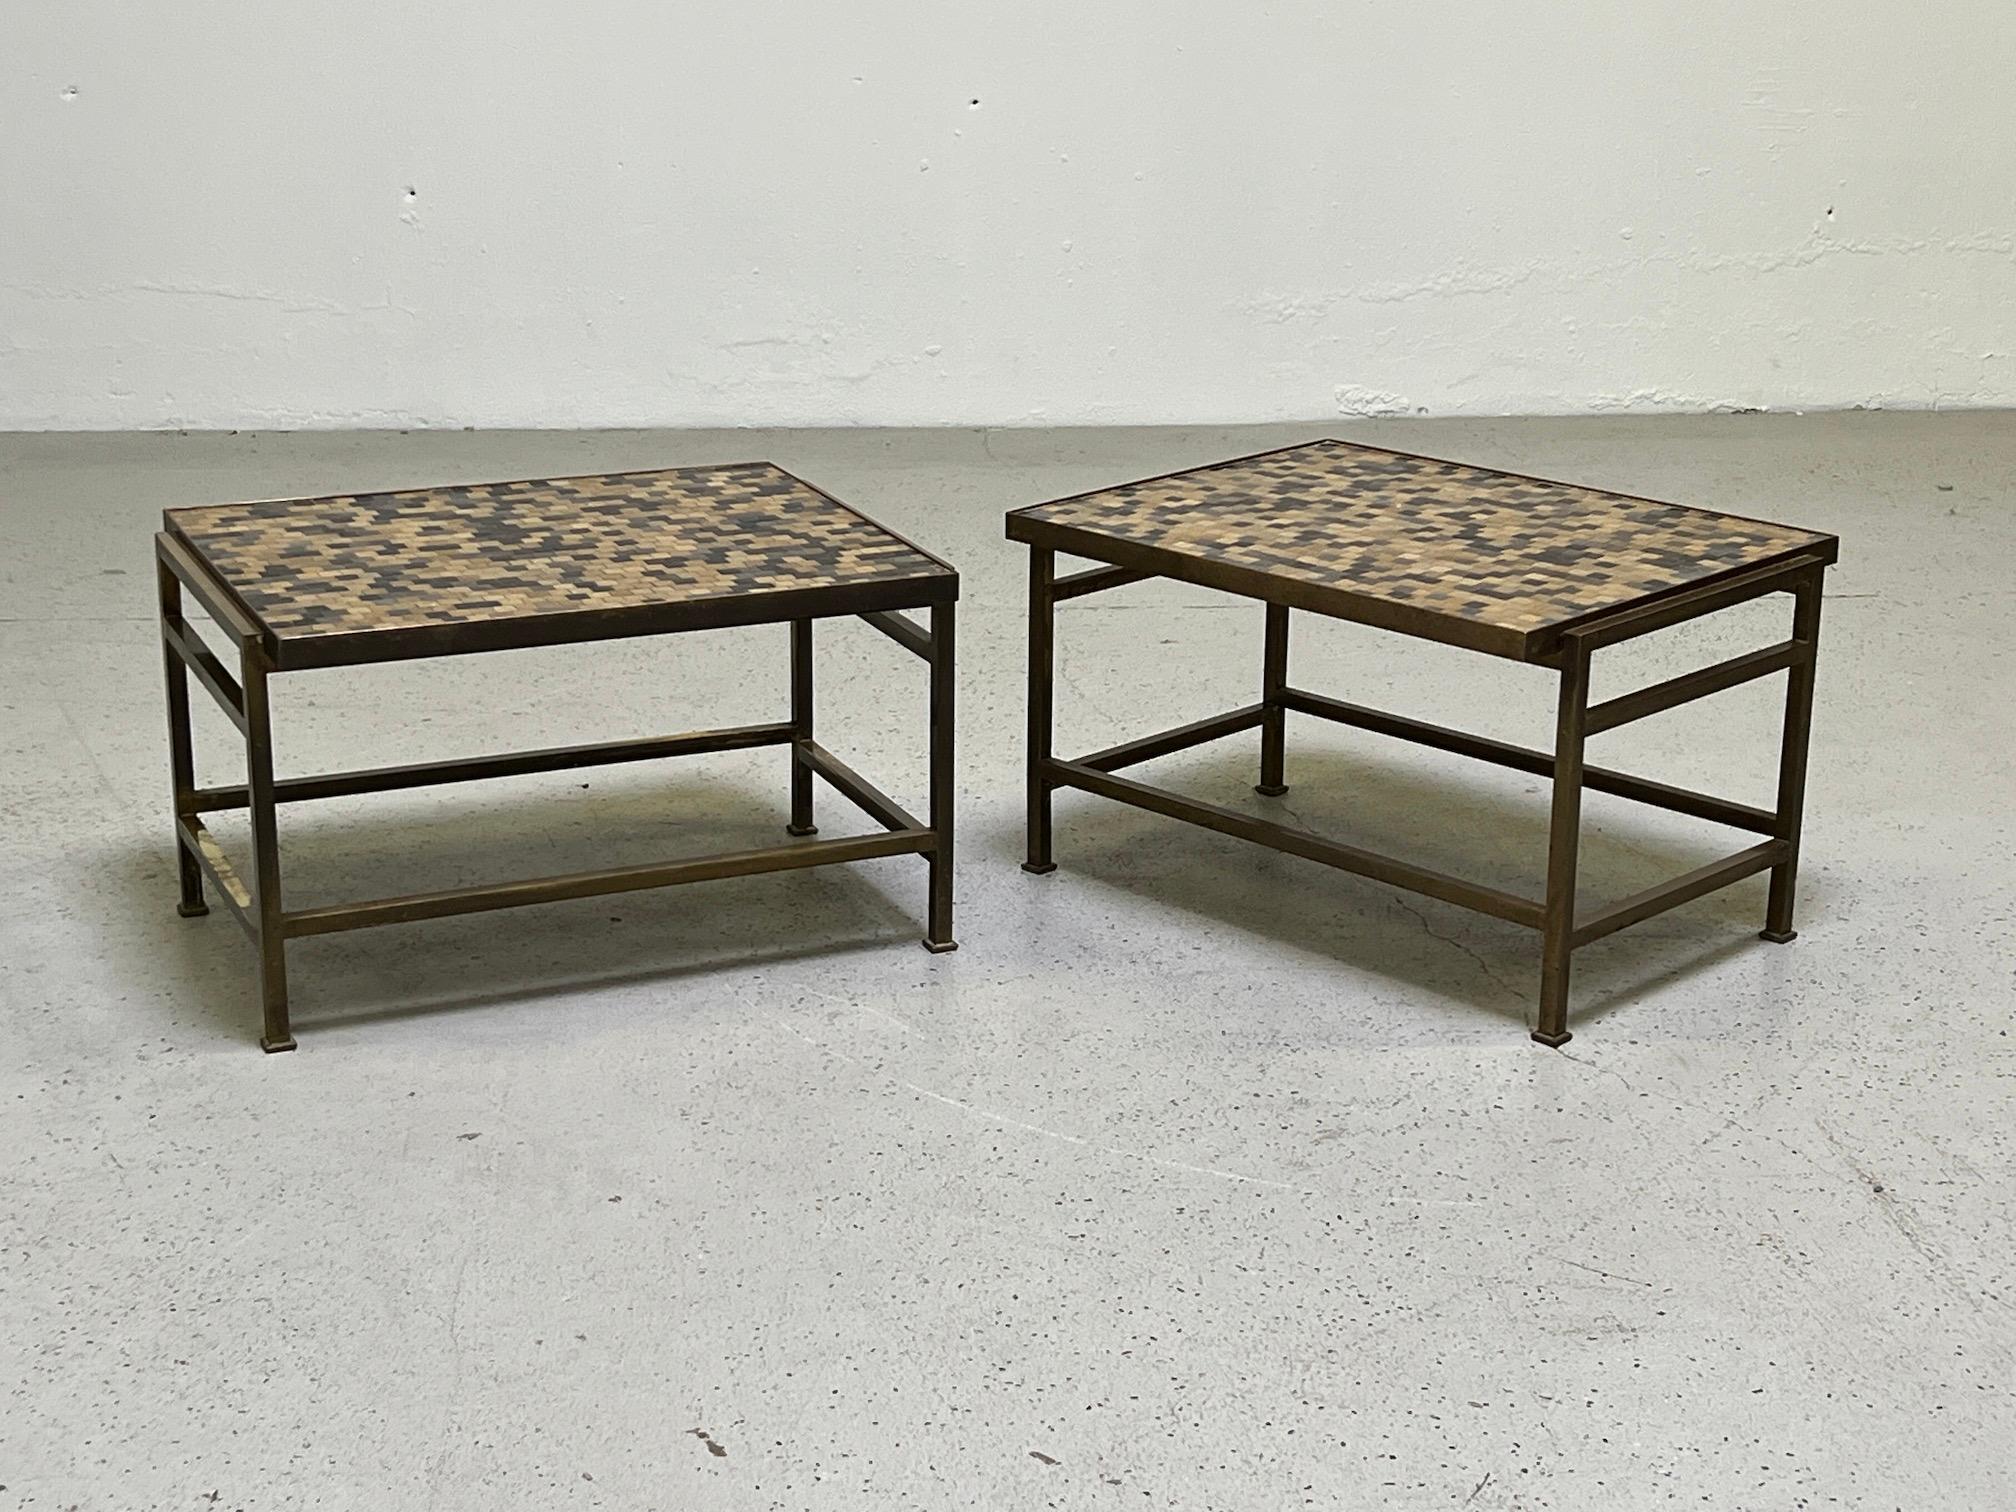 A pair of brass tables with Murano glass table tops designed by Edward Wormley for Dunbar.